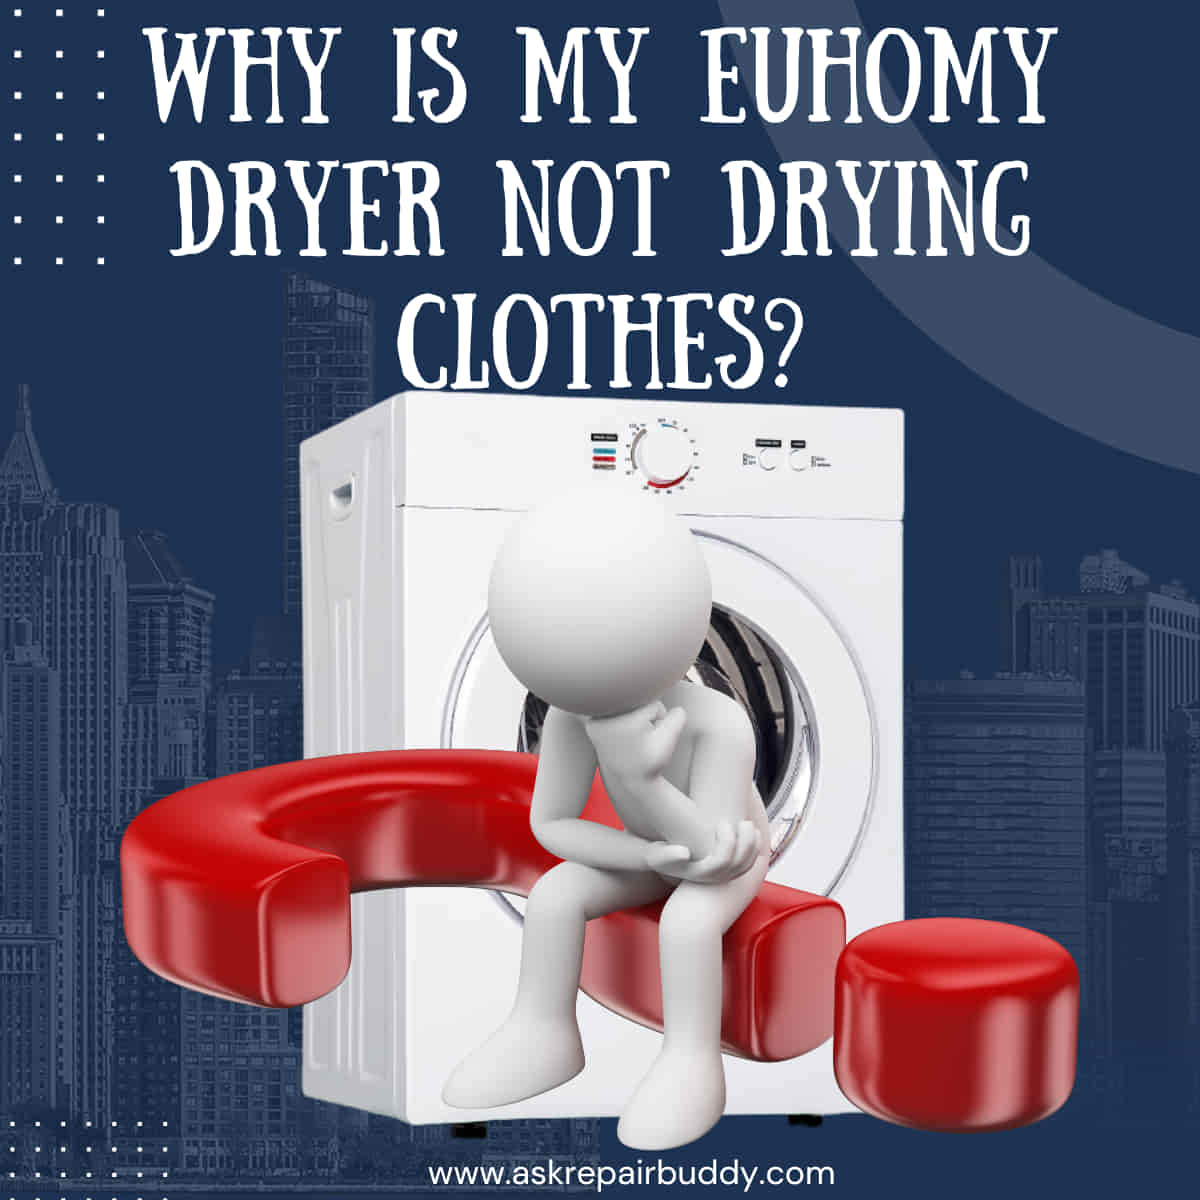 Why is my Euhomy Dryer not drying clothes